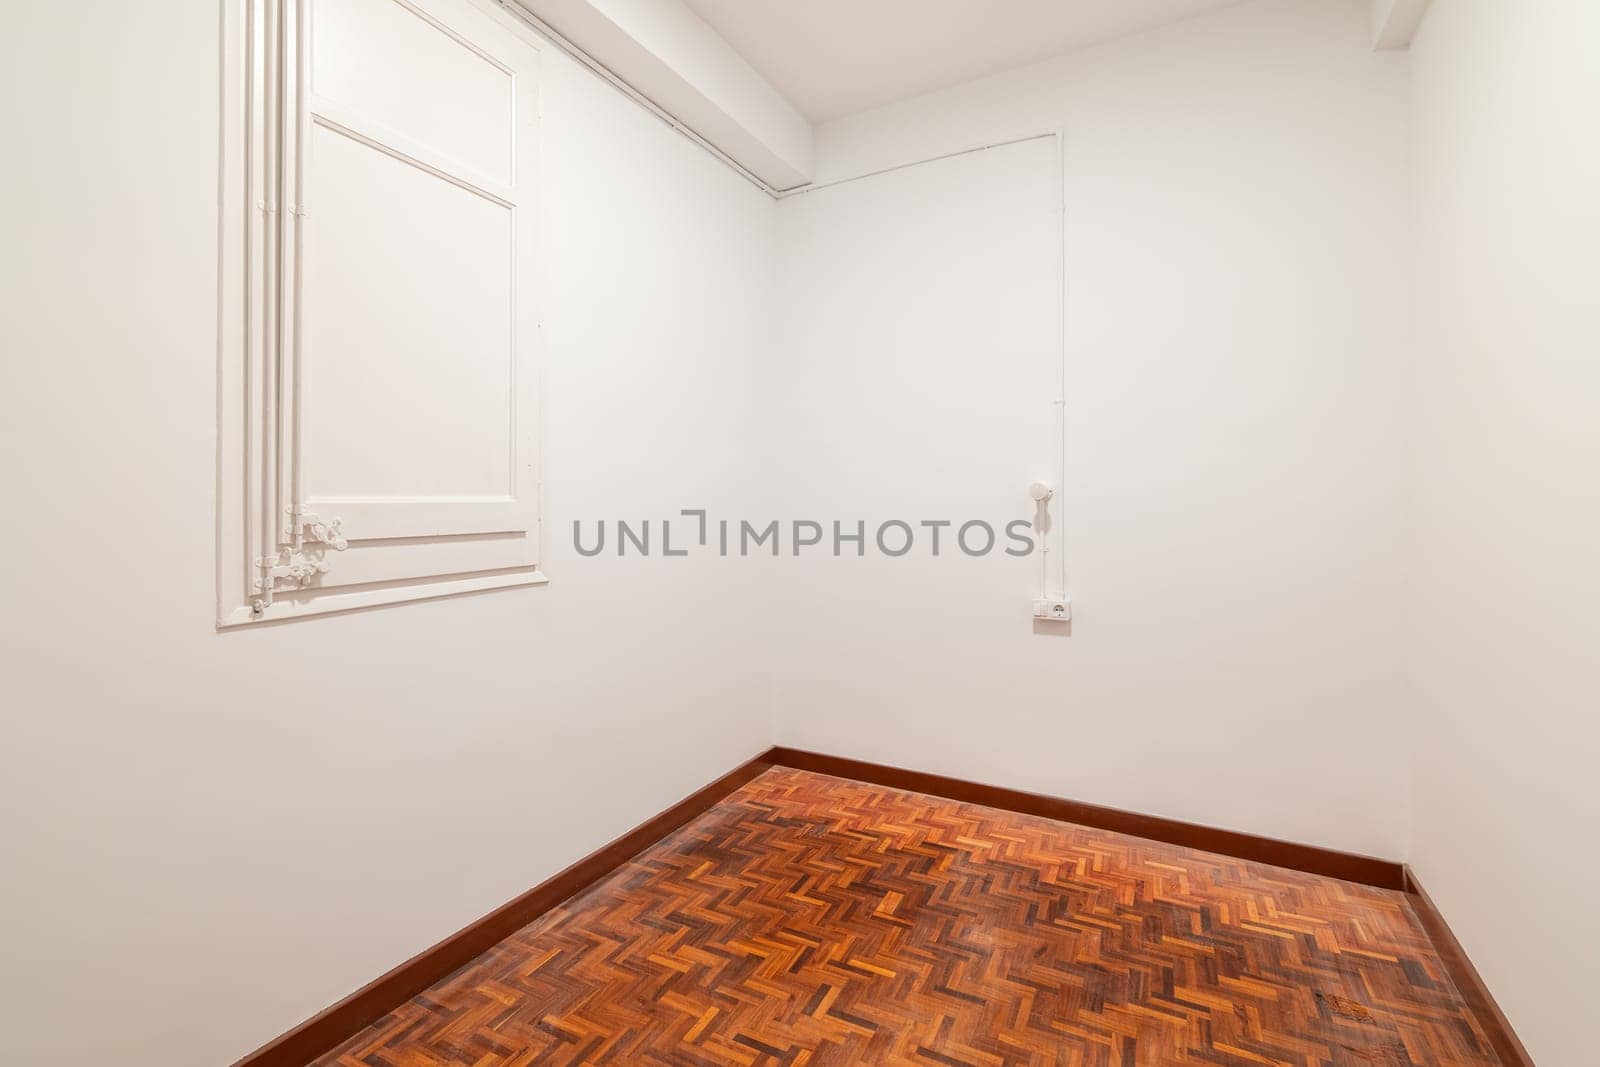 A vacant space featuring hardwood flooring, white walls, and closed window. by apavlin